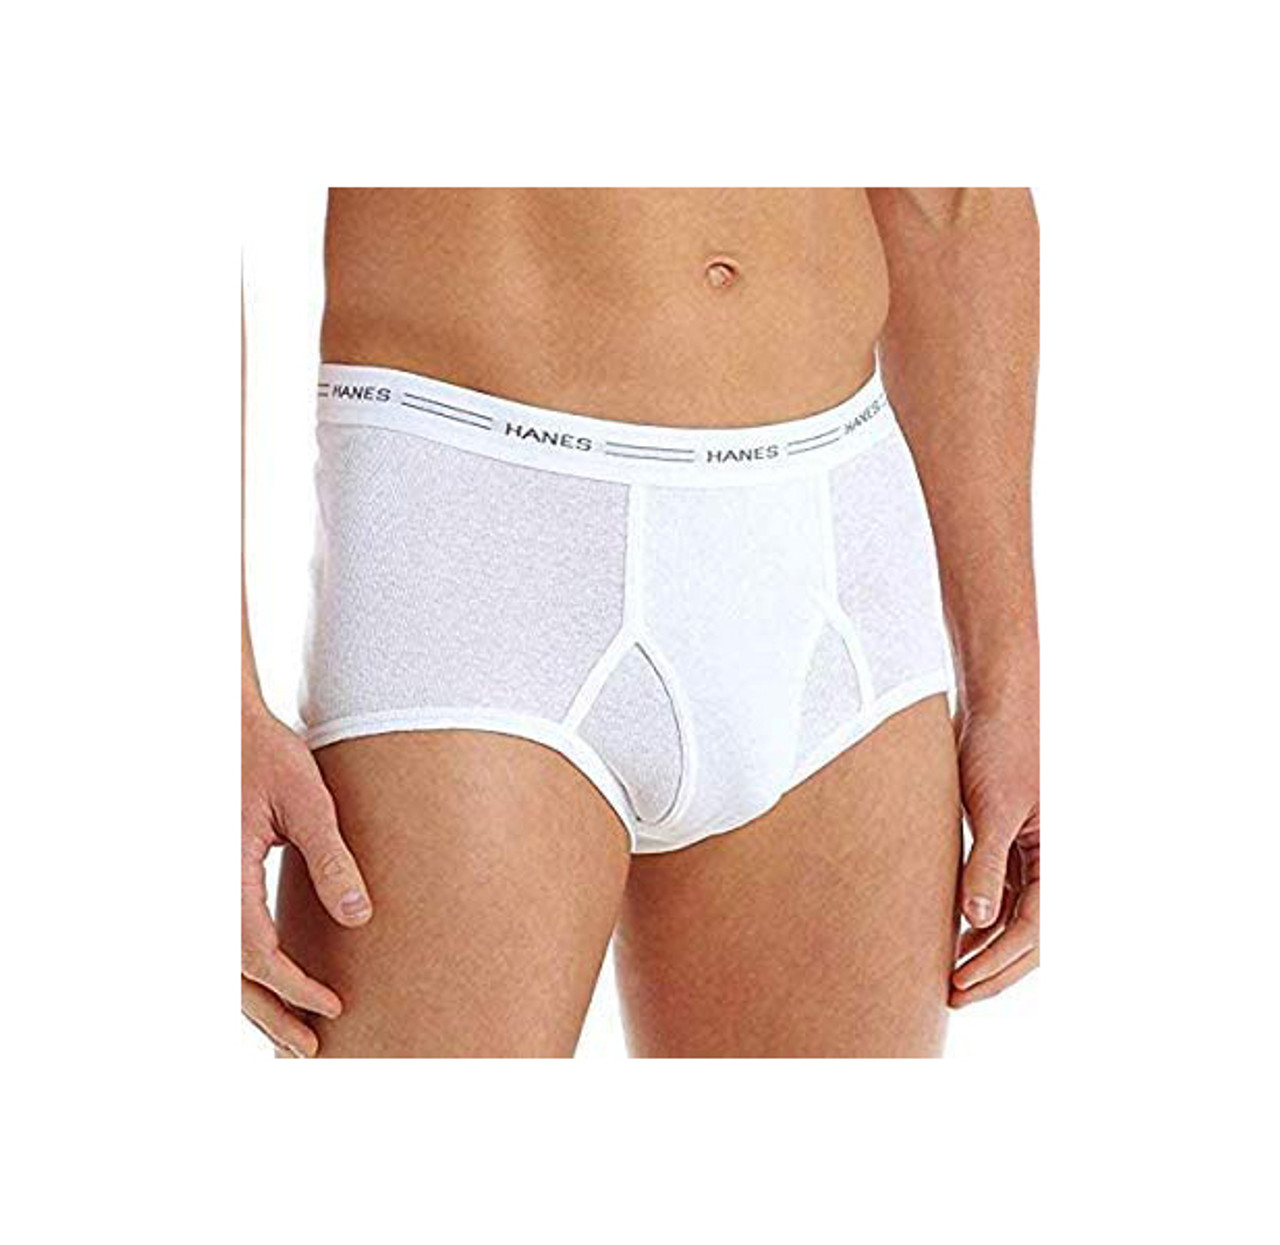 Hanes® Men’s Comfortsoft Tagless Briefs (6-Pack) product image